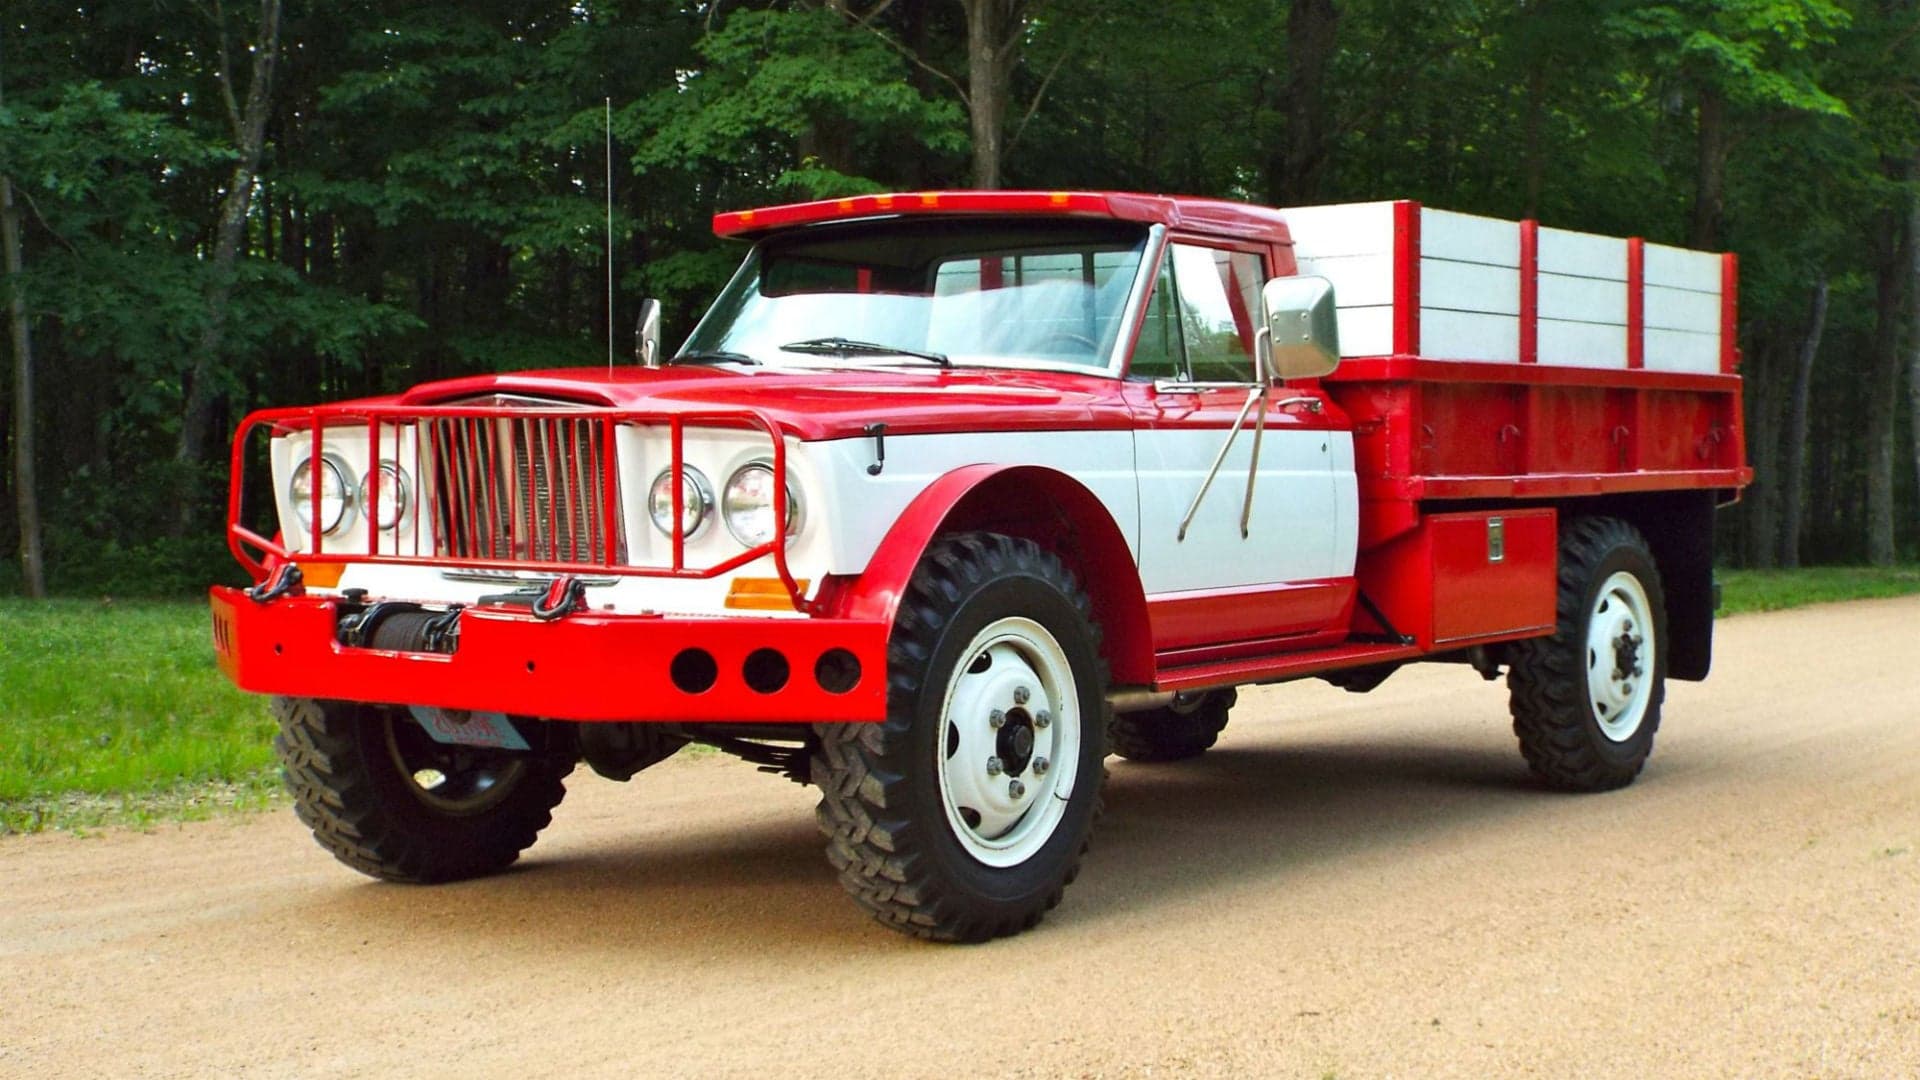 For Sale: Military-Issued 1968 Jeep ‘Five-Quarter’ Dump Truck Is the Ultimate American Workhorse